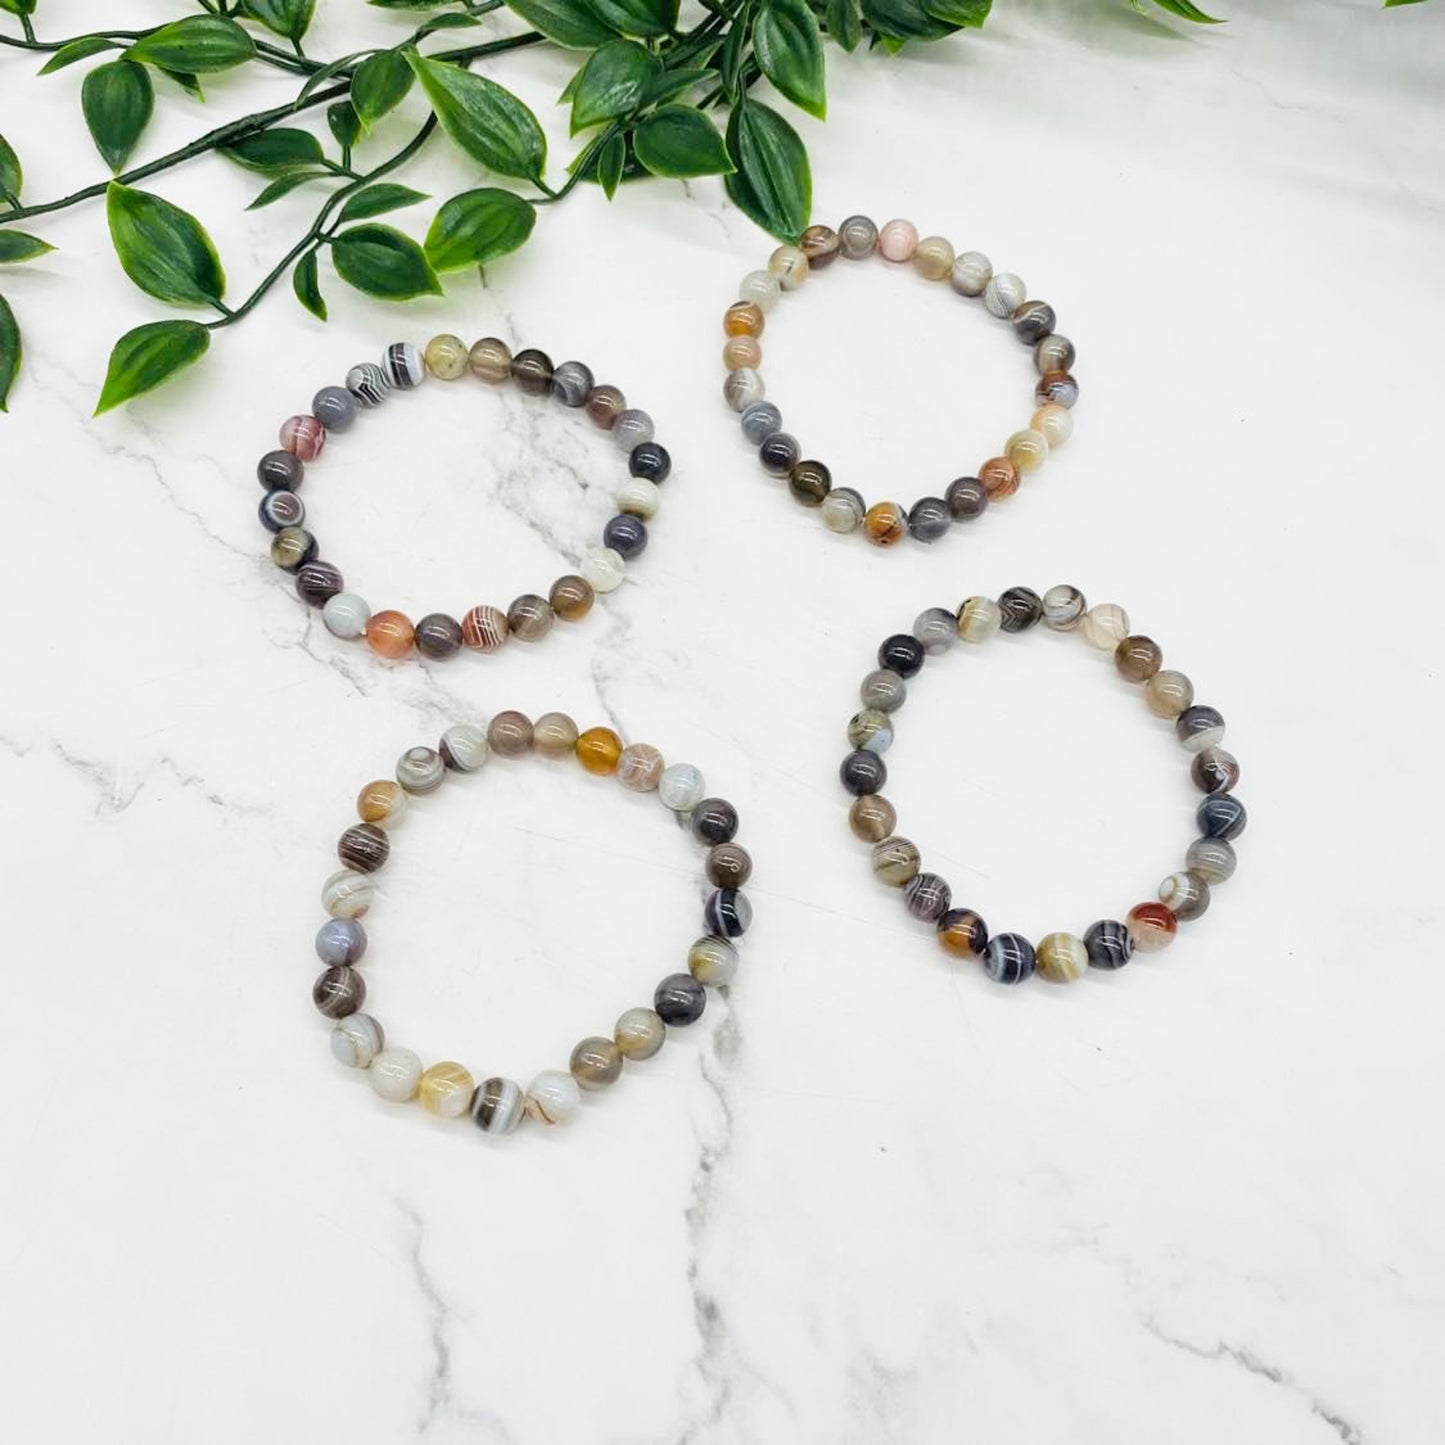 Botswana Agate Bracelet, Crystal for Self Confidence and Wealth